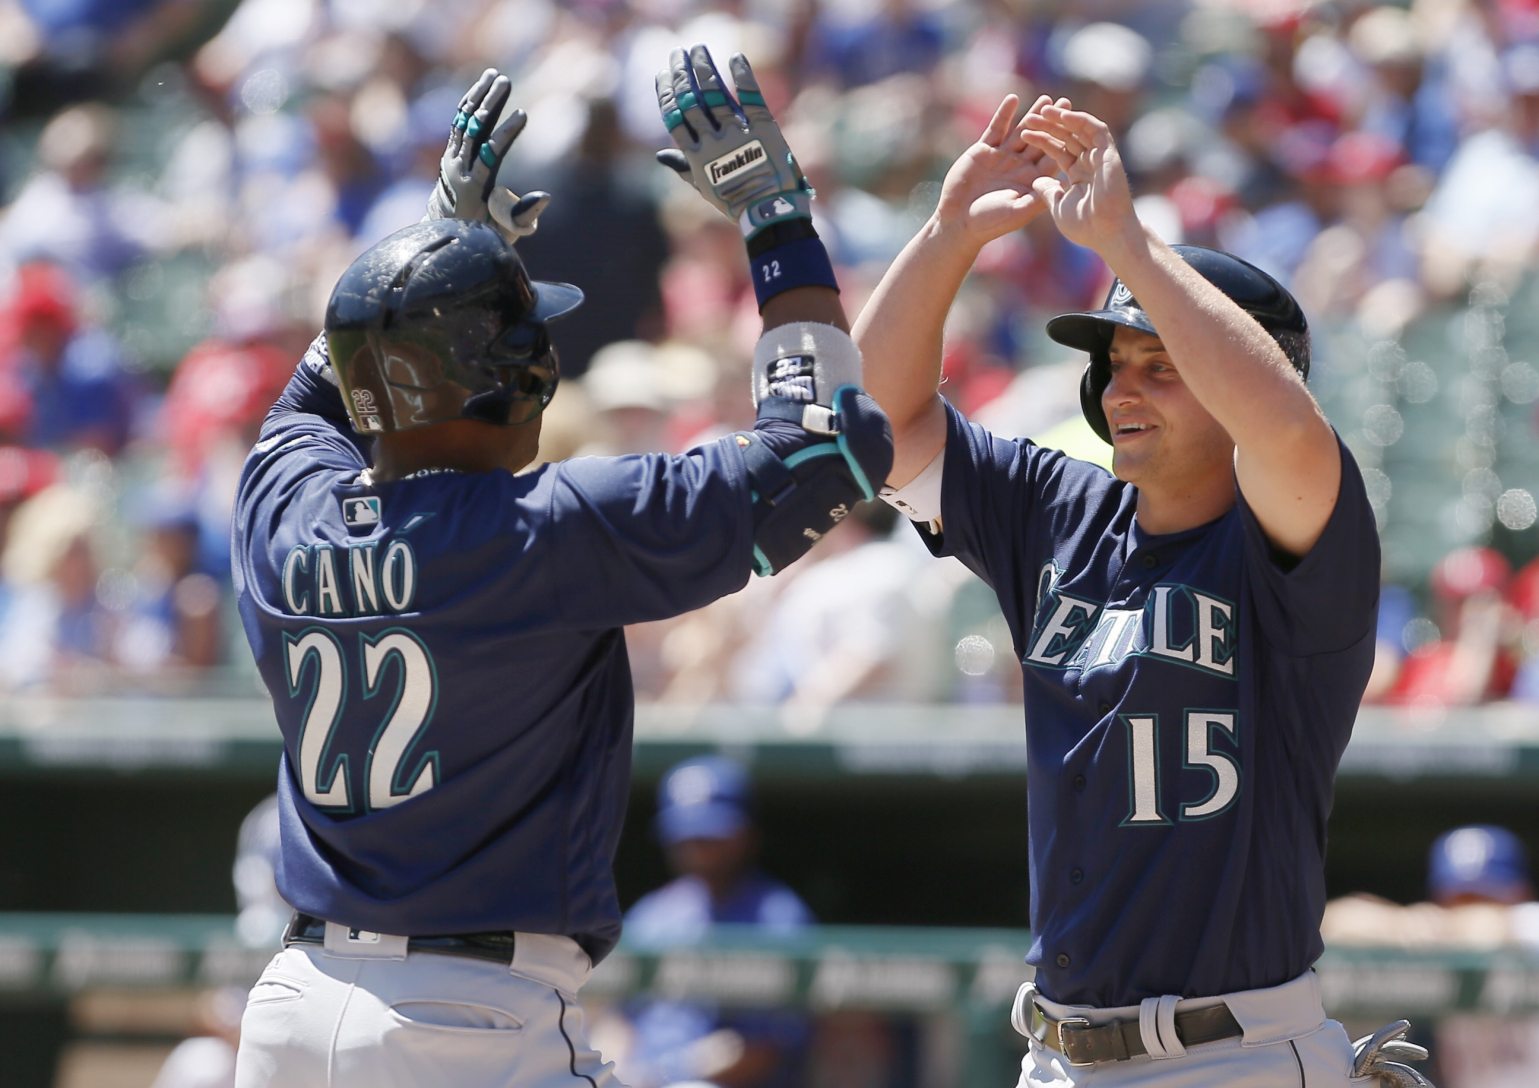 Seattle Mariners&#039; Robinson Cano (22) is congratulated by Kyle Seager (15) after hitting a two run home run during the first inning of a baseball game against the Texas Rangers Wednesday, April 6, 2016, in Arlington, Texas.